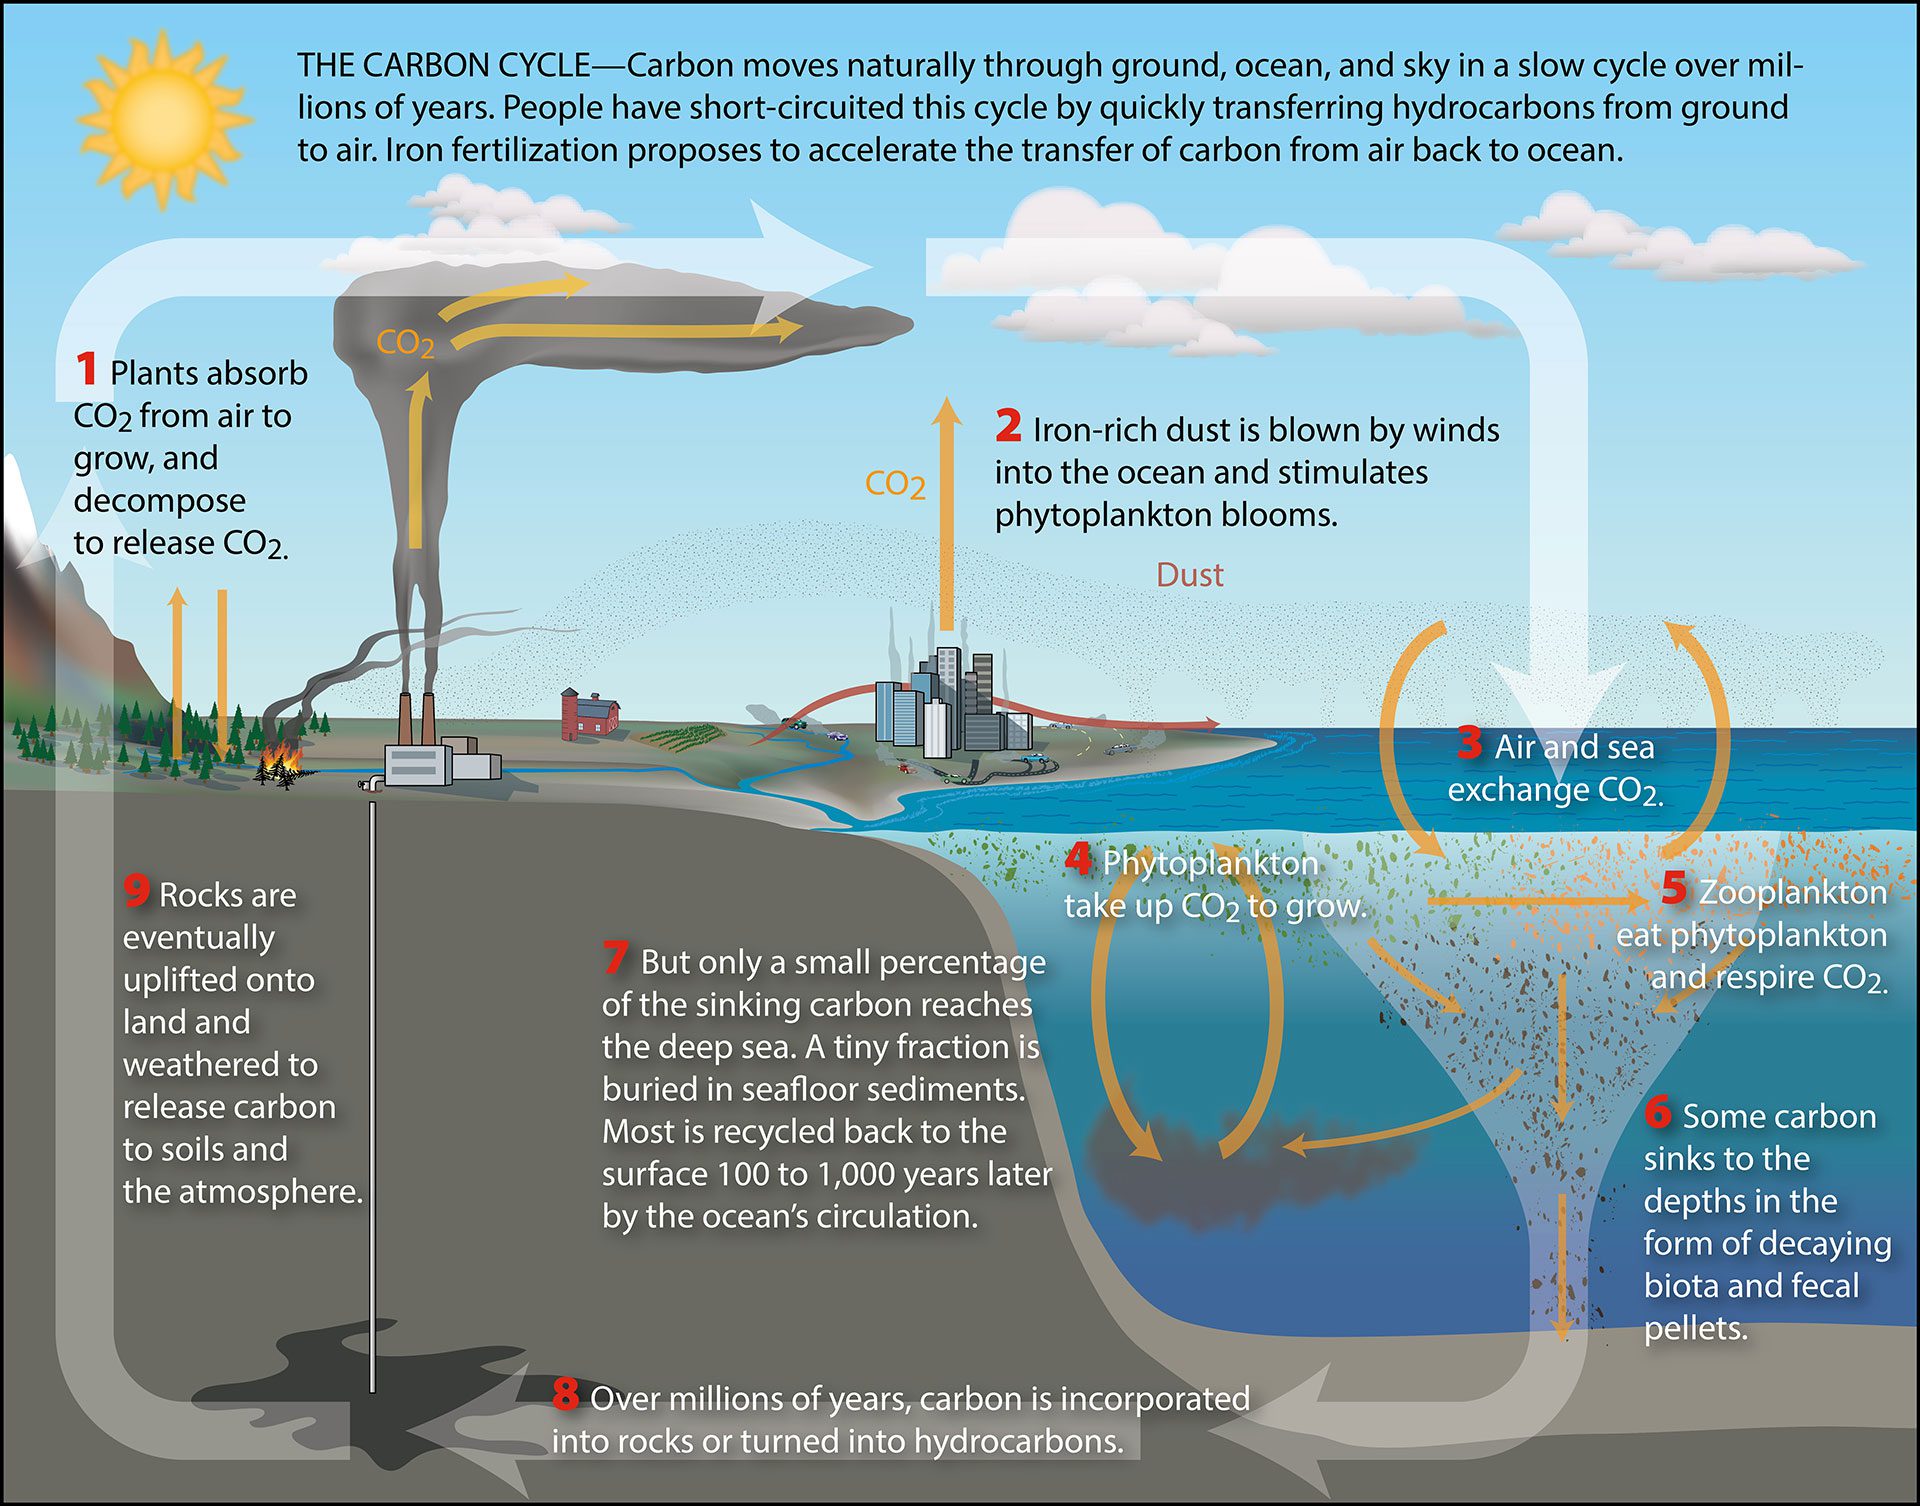 Carbon Cycle - Woods Hole Oceanographic Institution